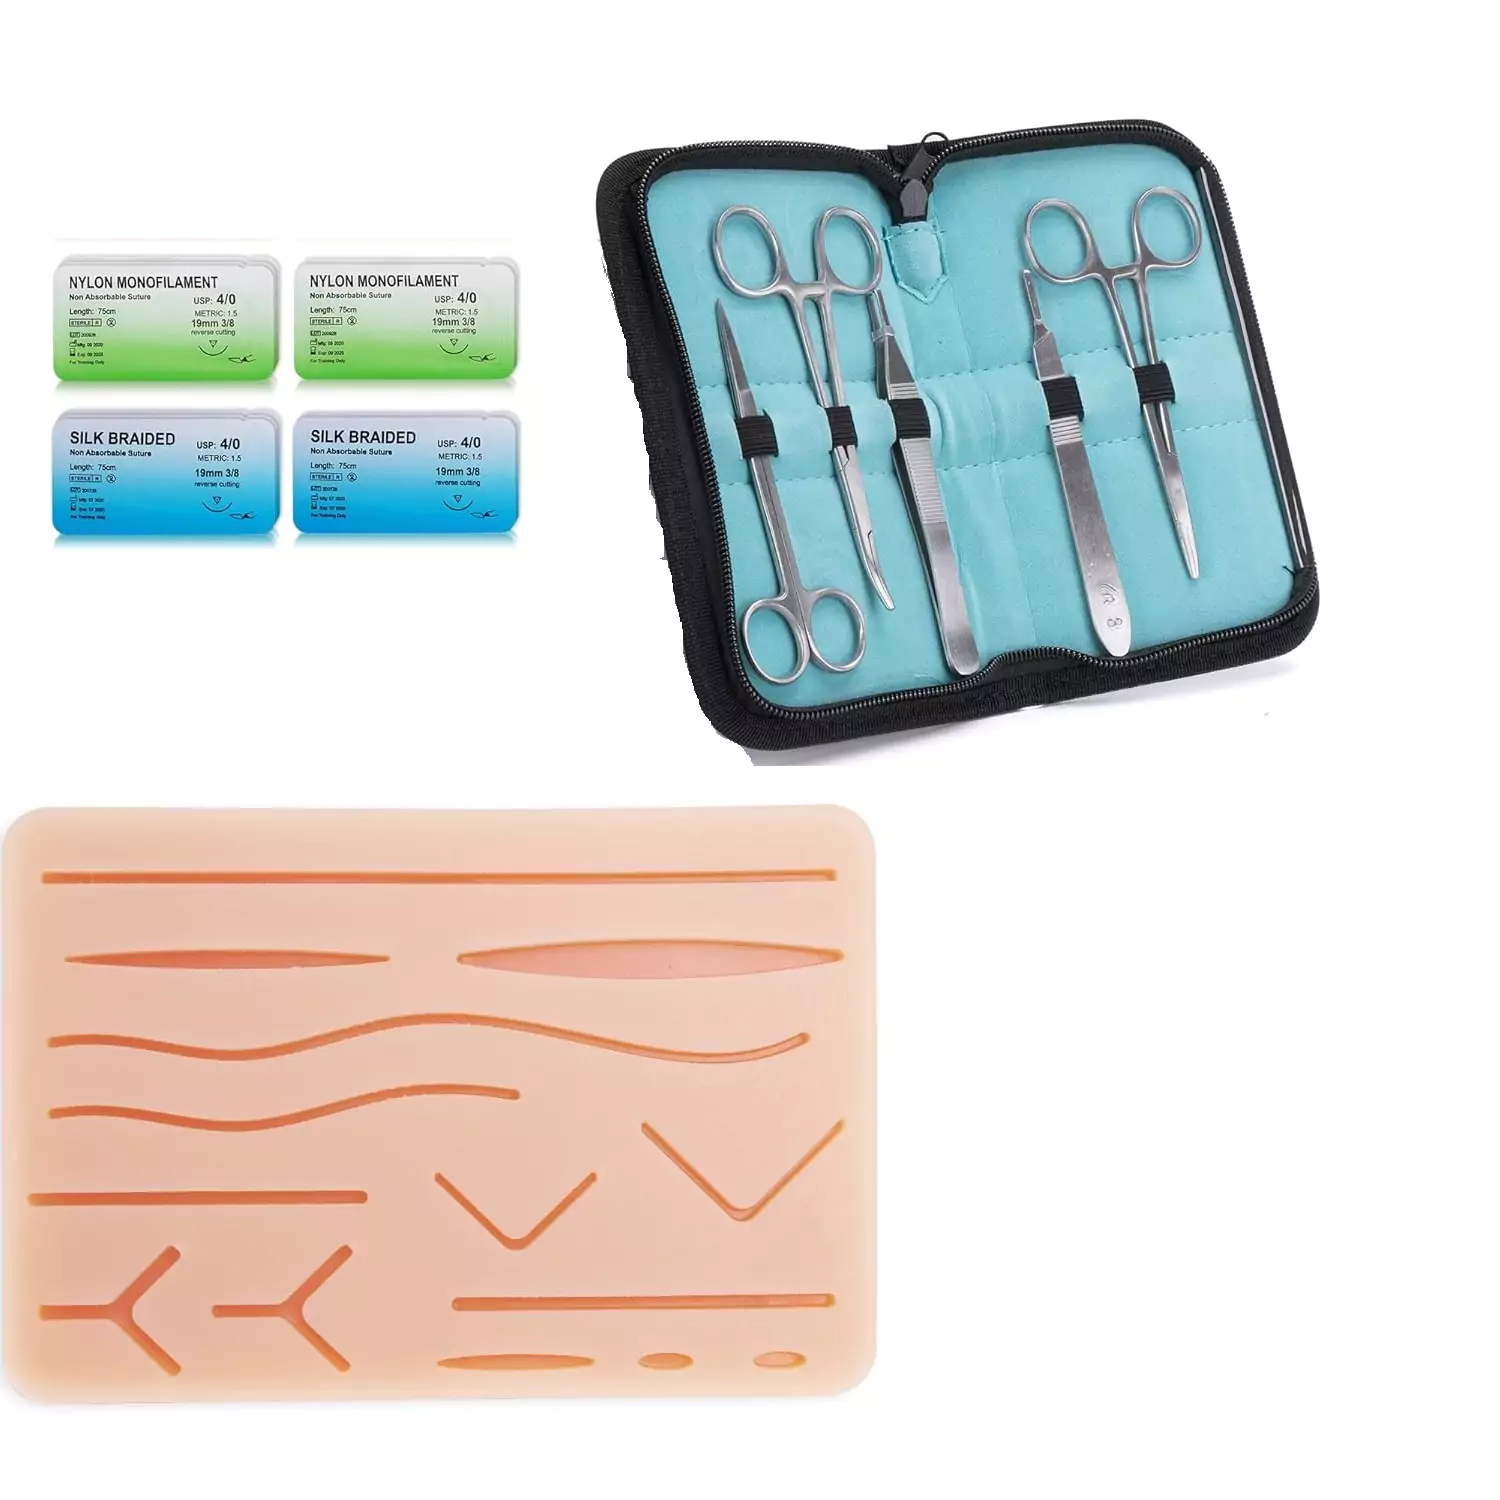 Expert Suture Training Kit with Dual-Layer Practice Pad